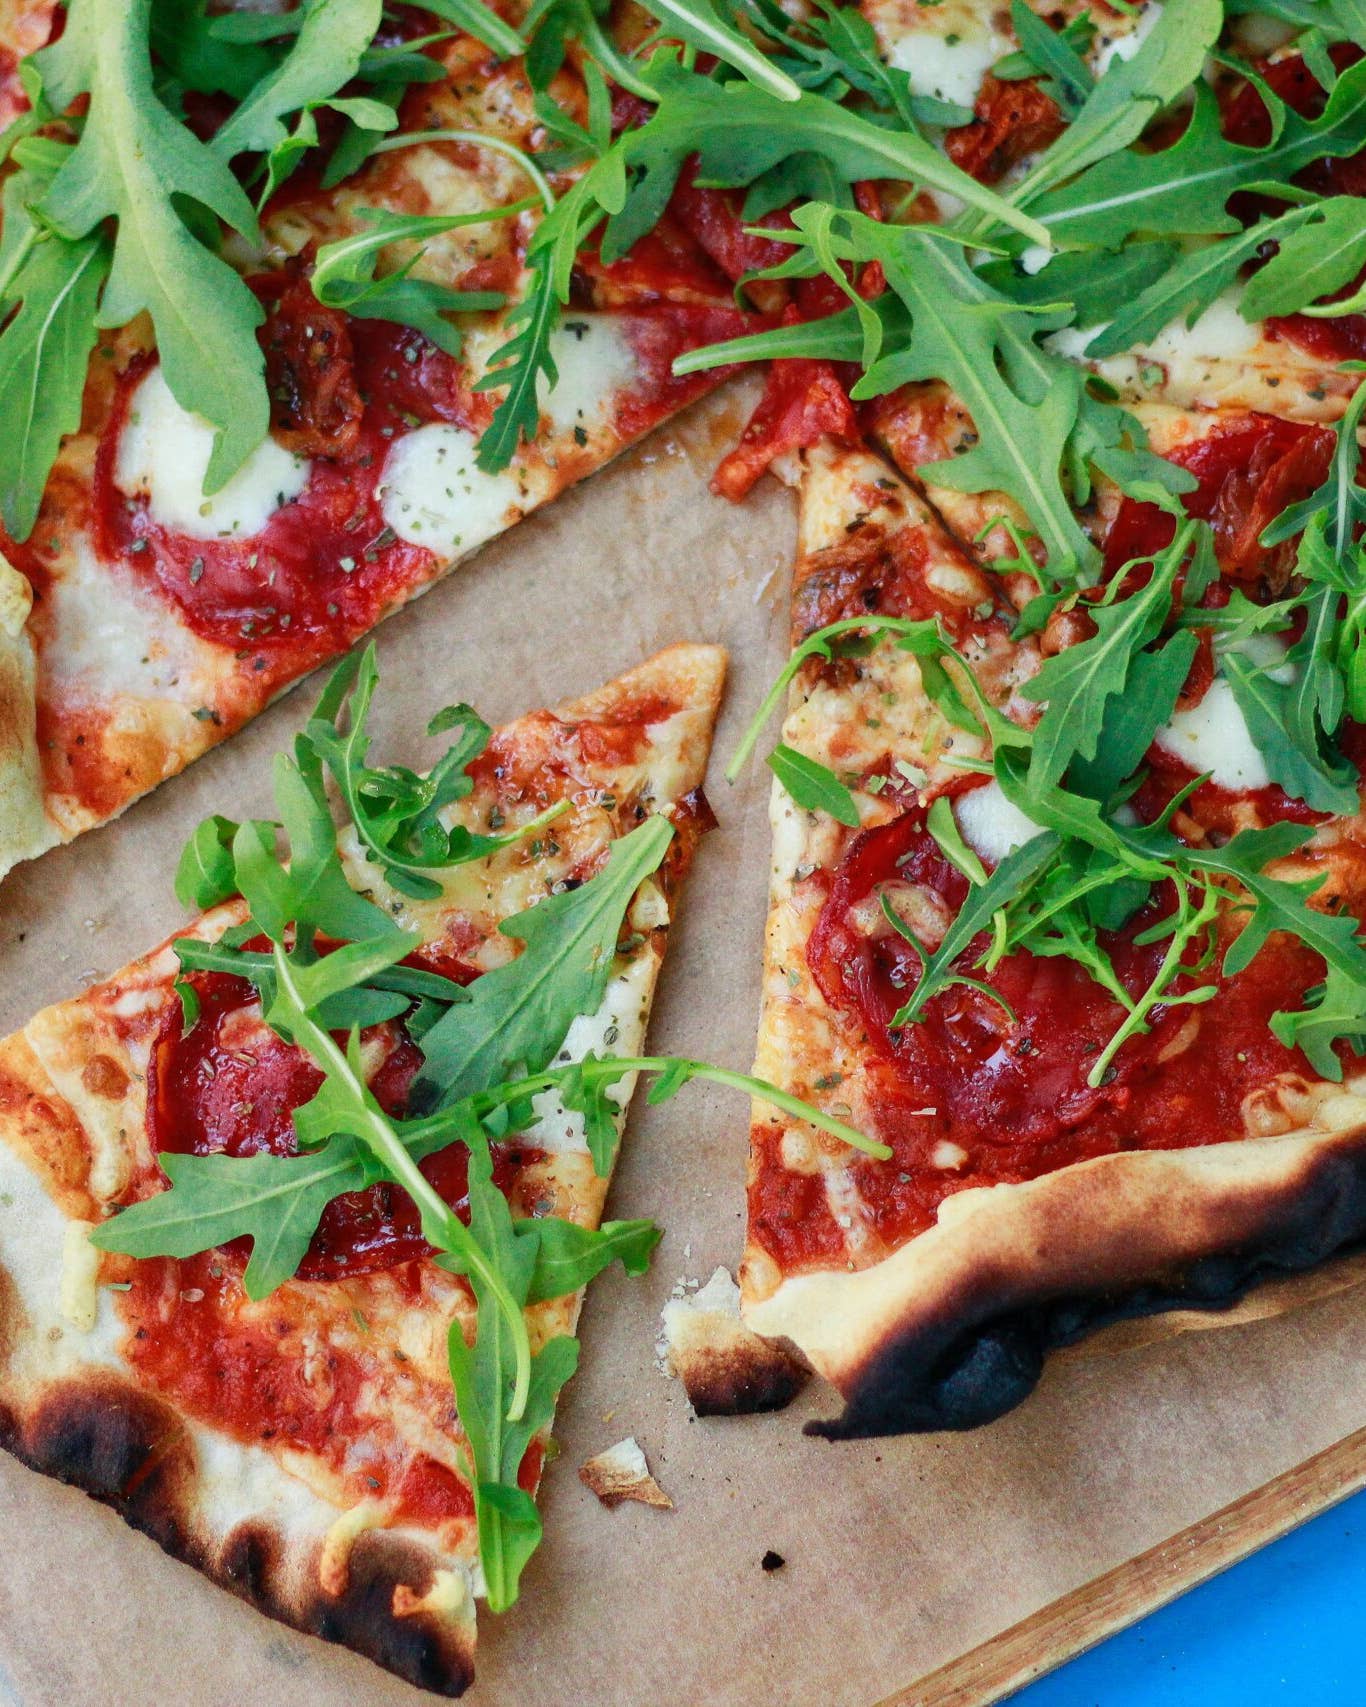 Achieve Chrispy, Cheese Perfection With the Best Pizza Ovens